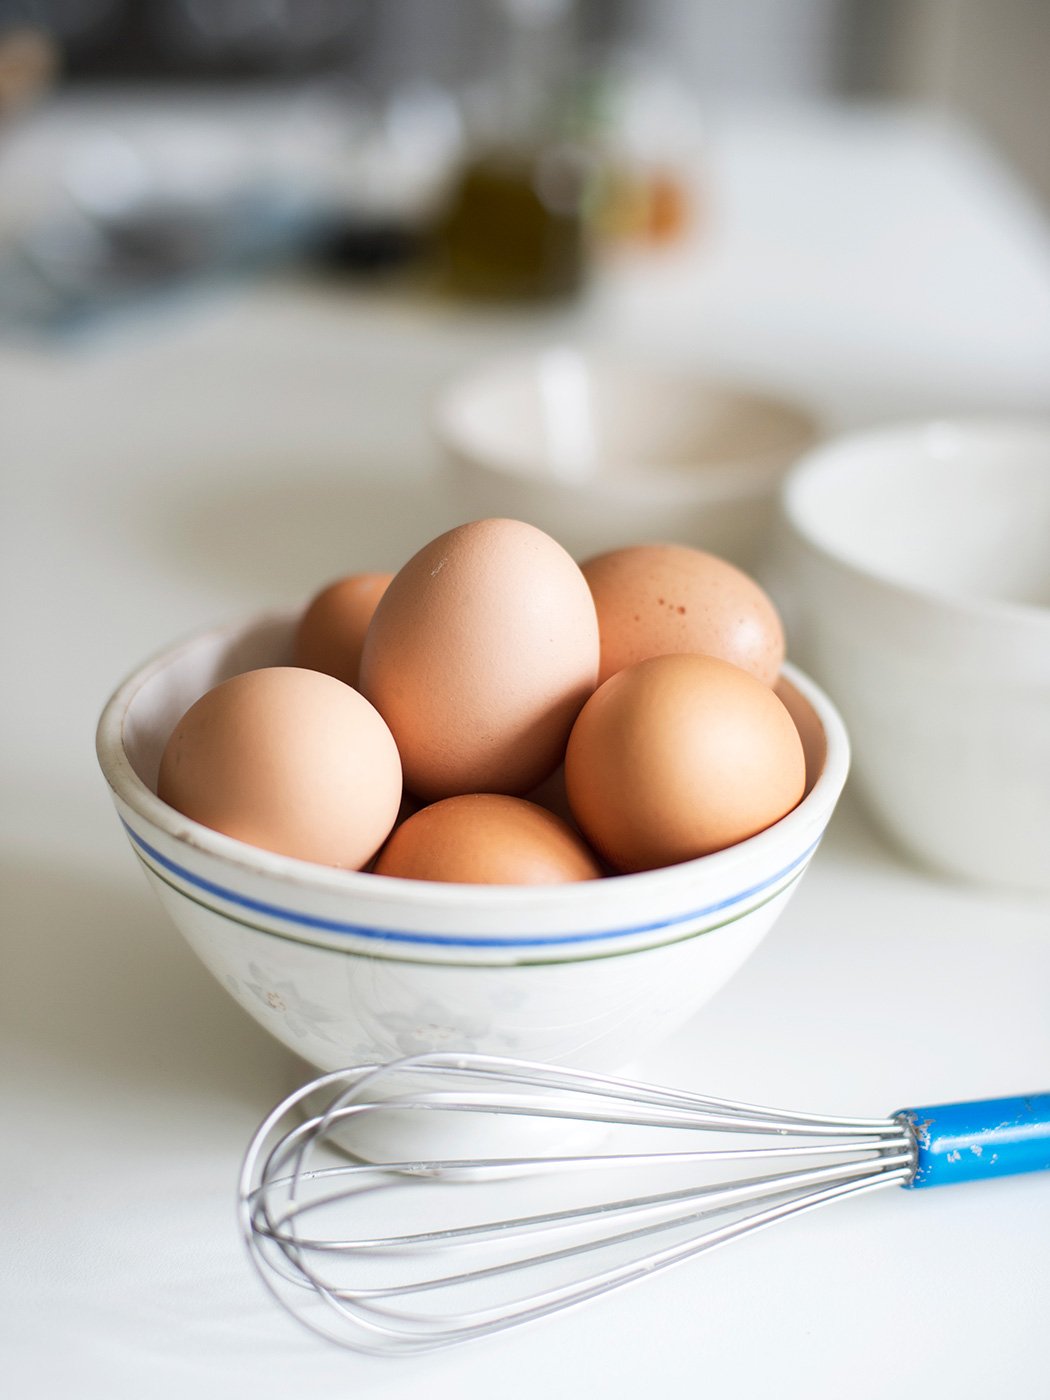 Bowl of eggs with shallow depth of field